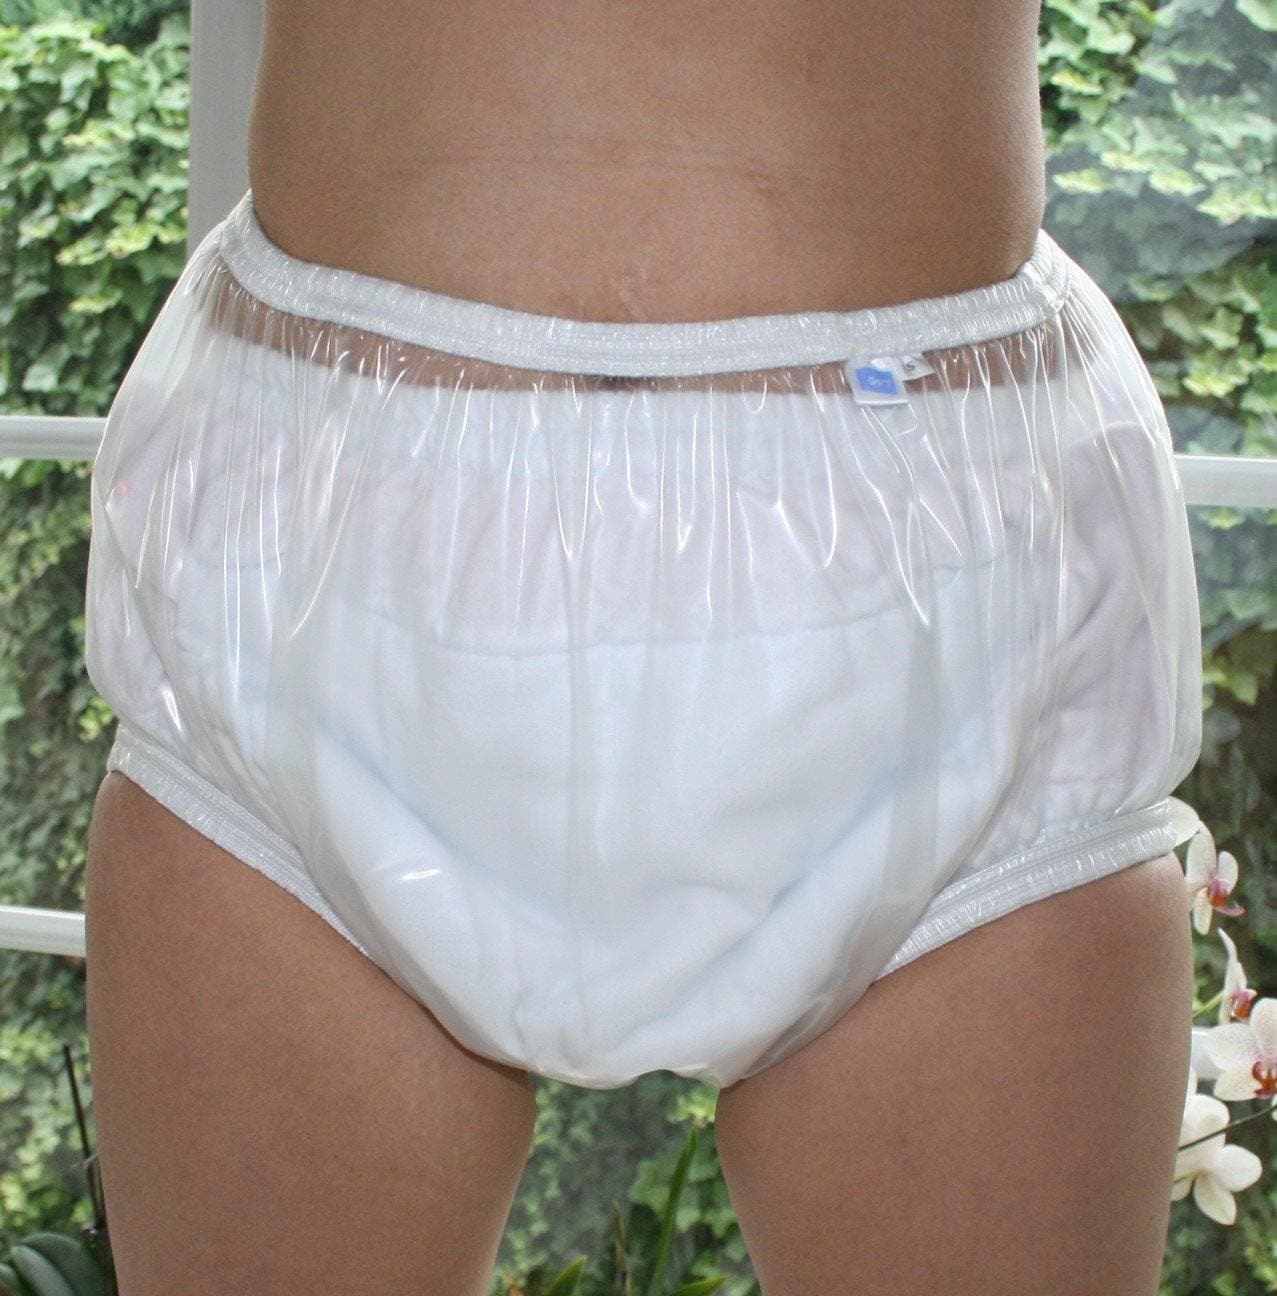 PVC Adult Baby Incontinence Button Nappy Pants Rubber Pants